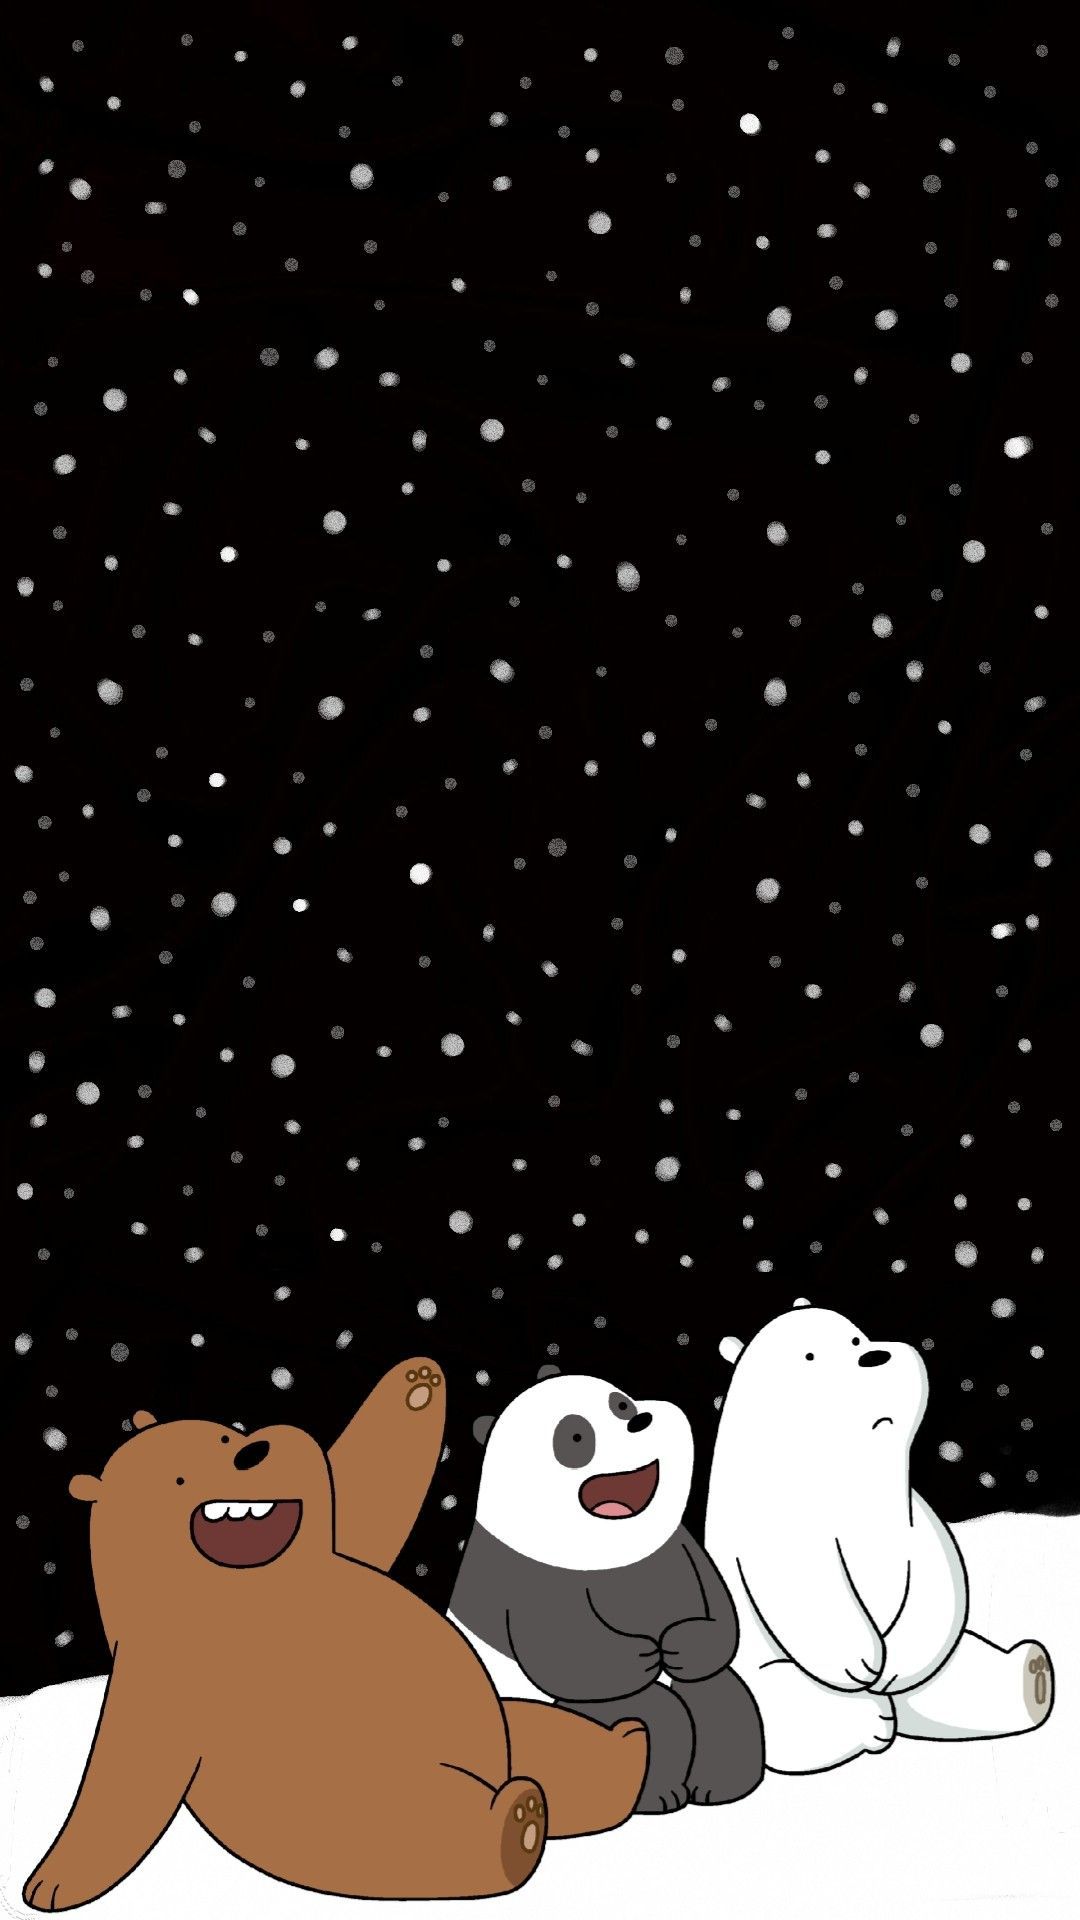 I edited this We Bare Bears picture and put in a little drizzle